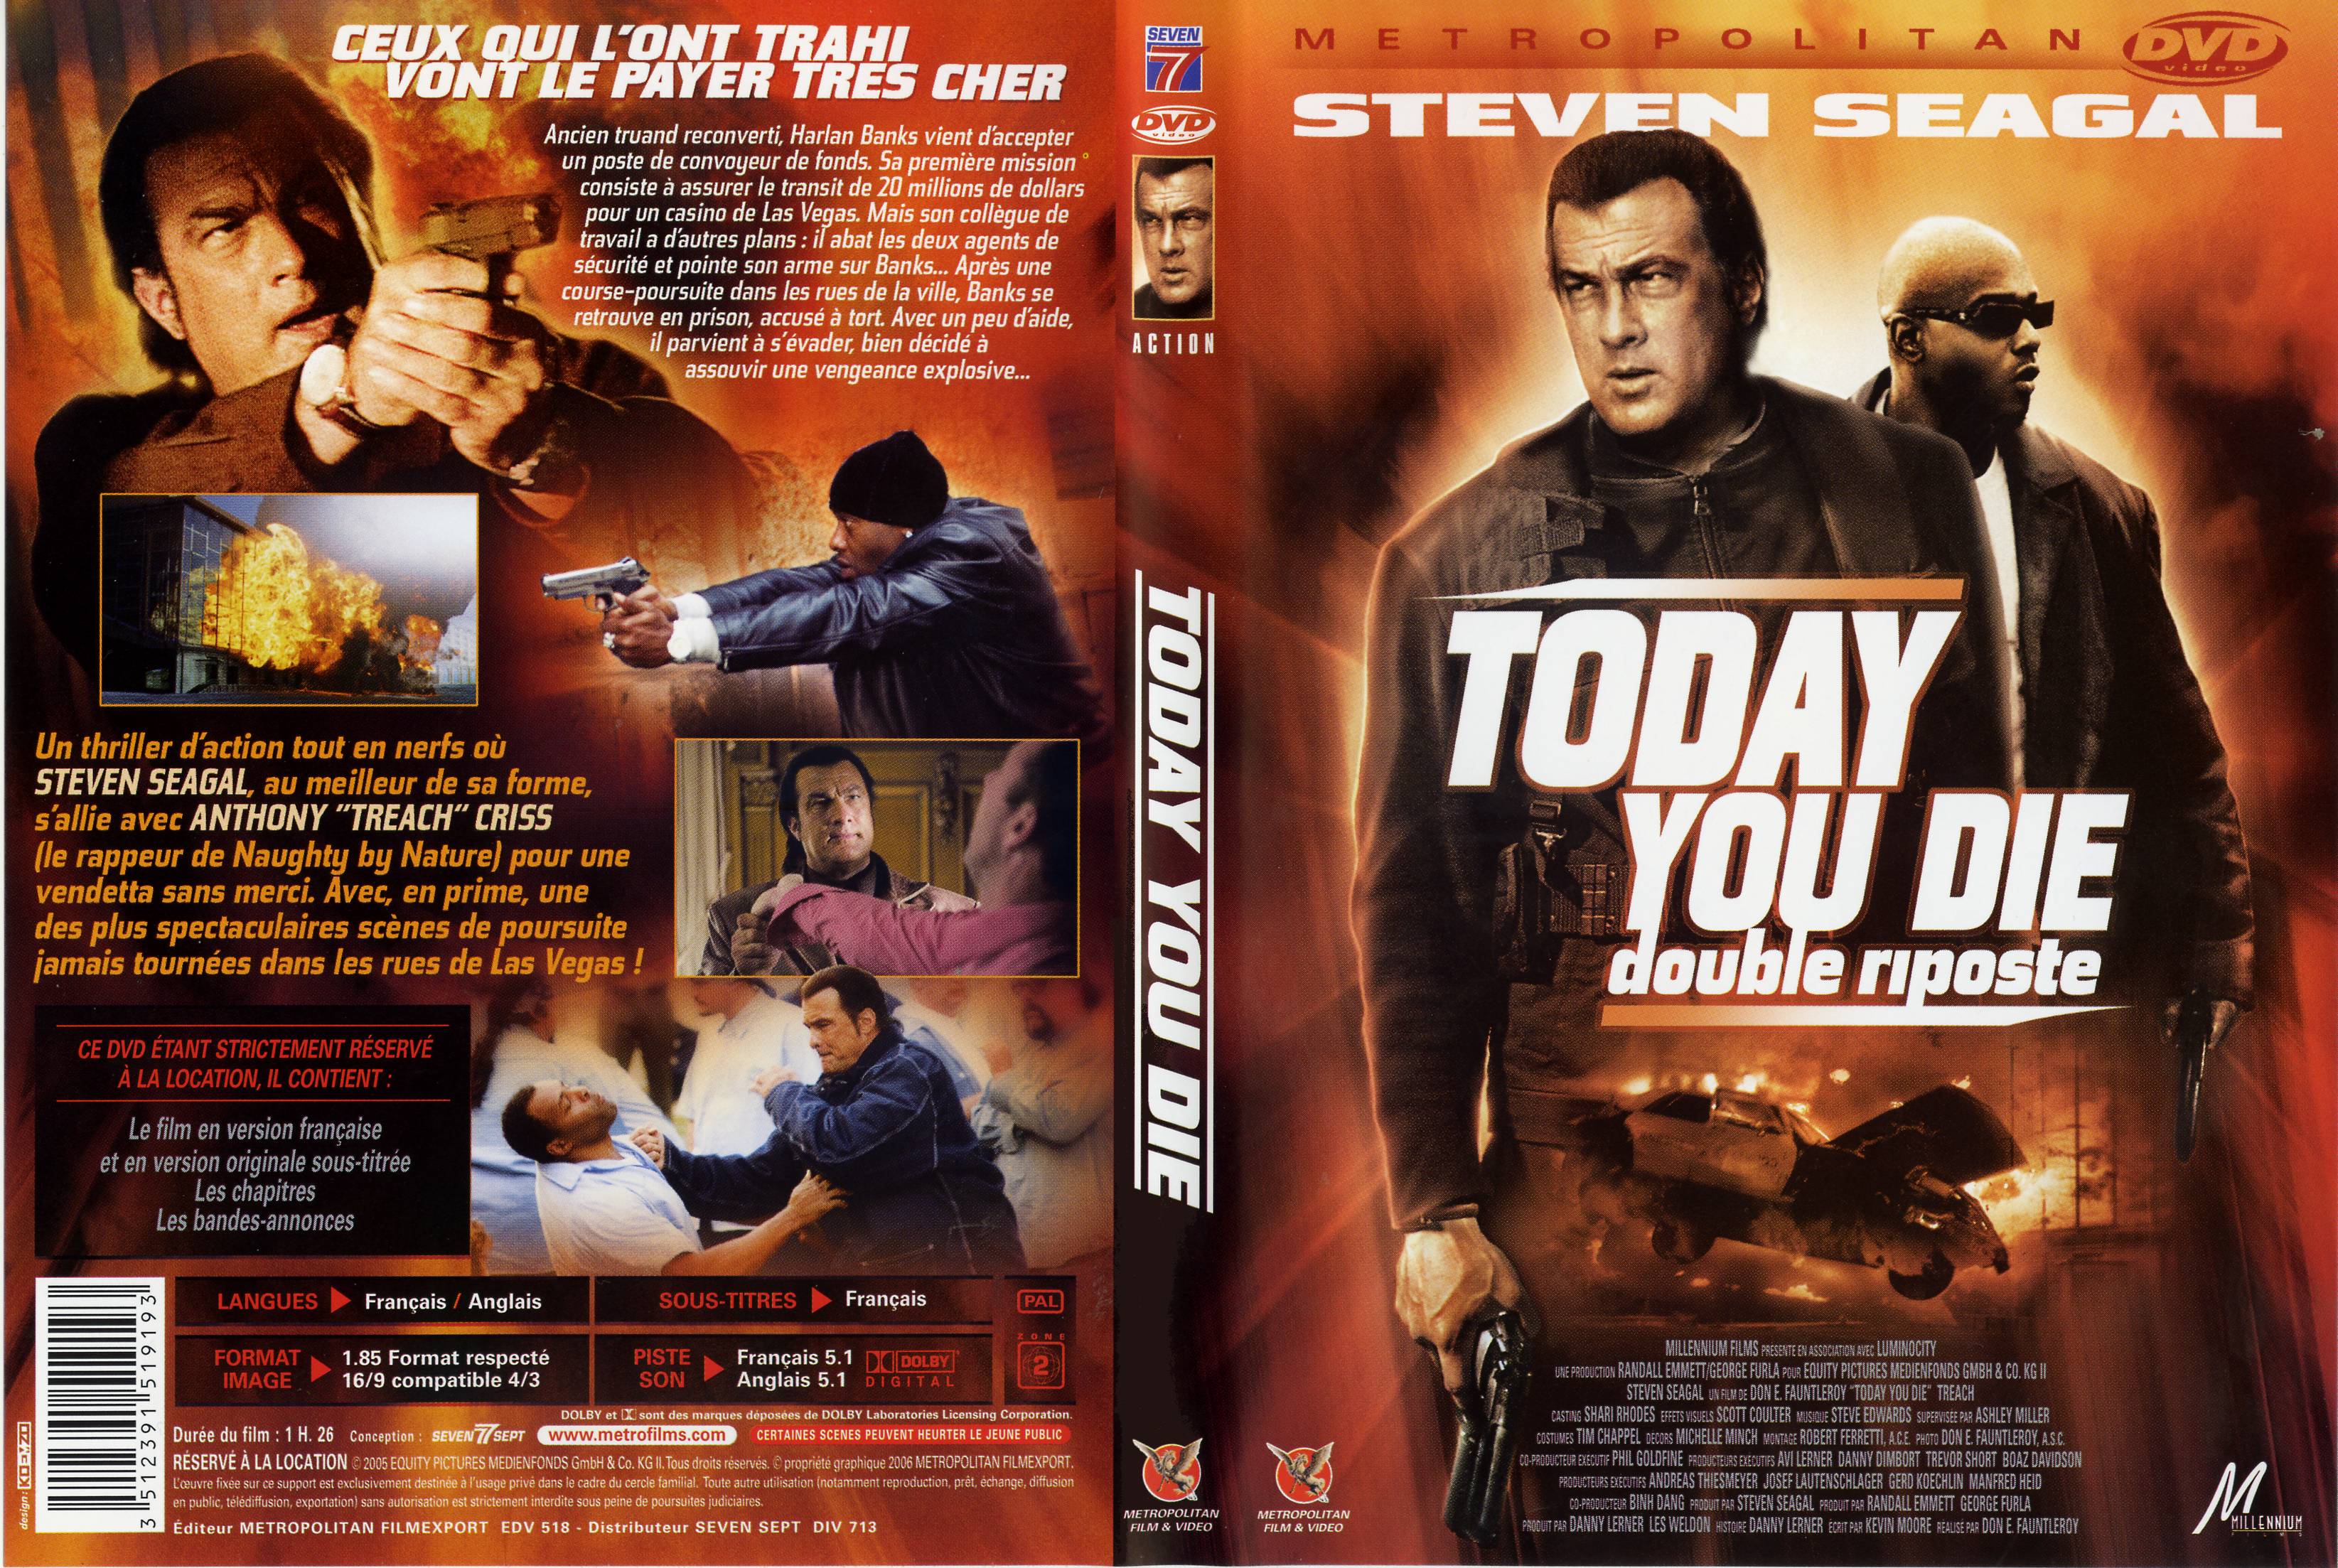 Jaquette DVD Today you die v2